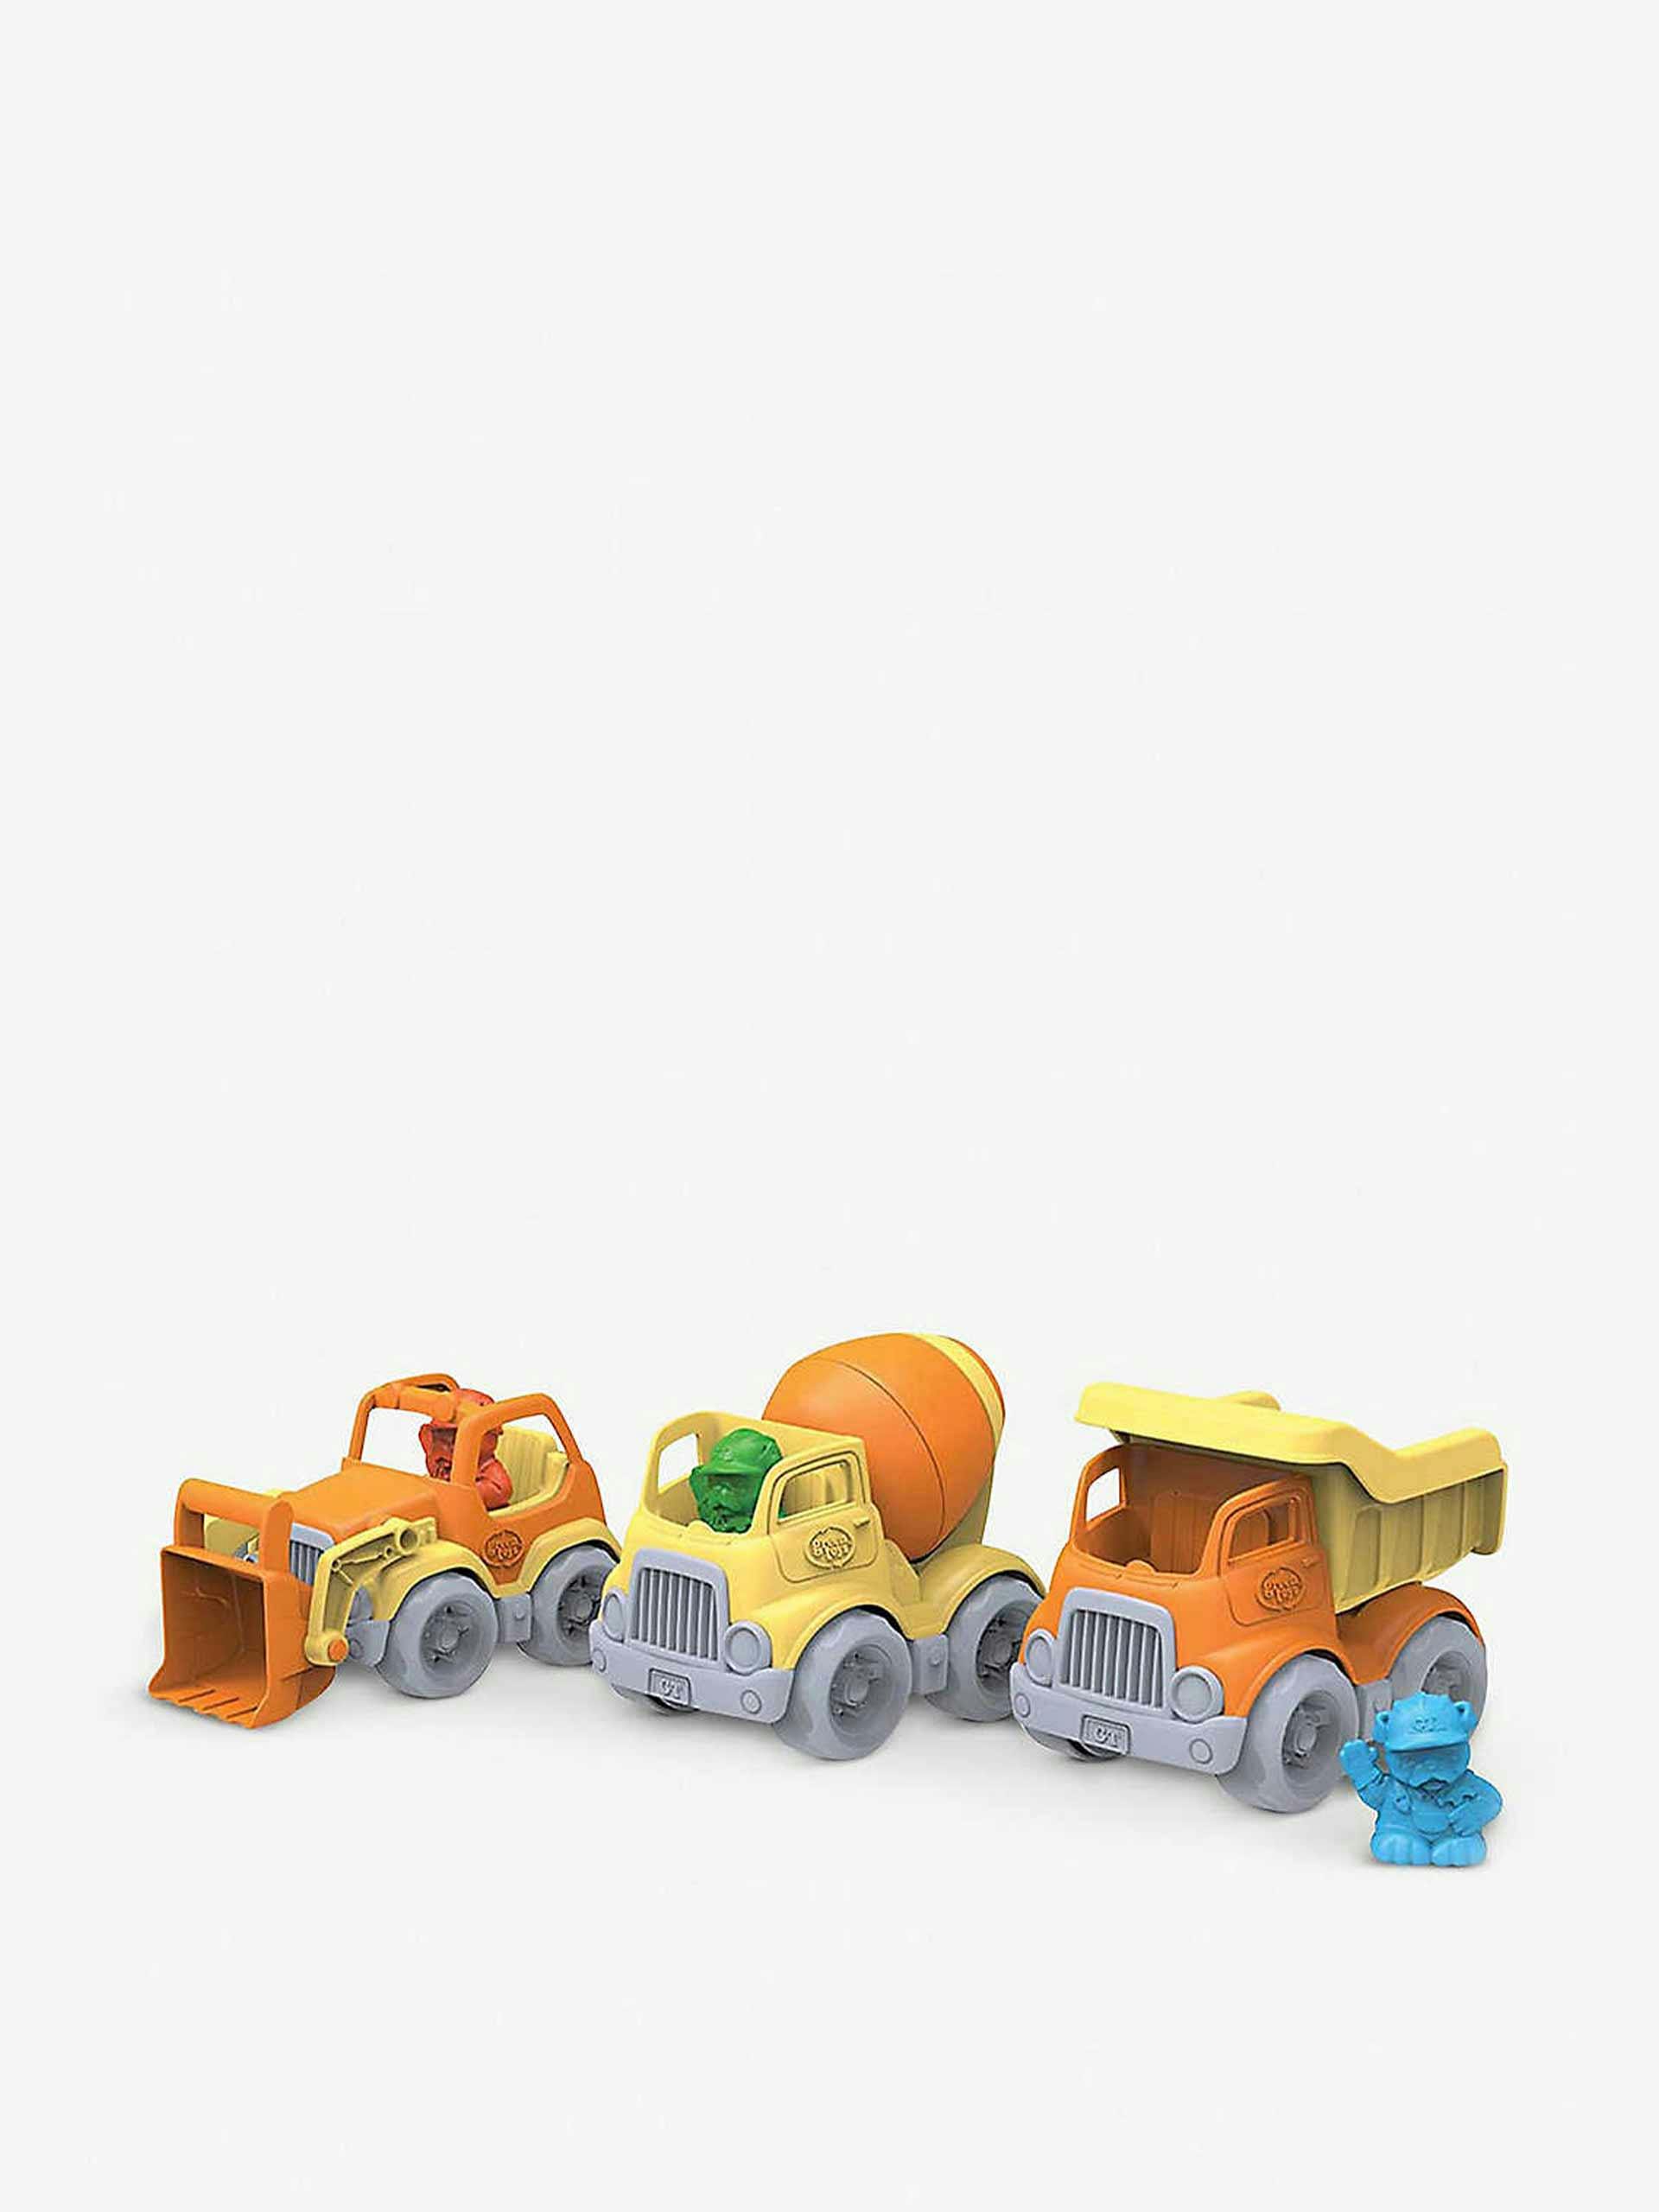 Recycled plastic scooper truck toy